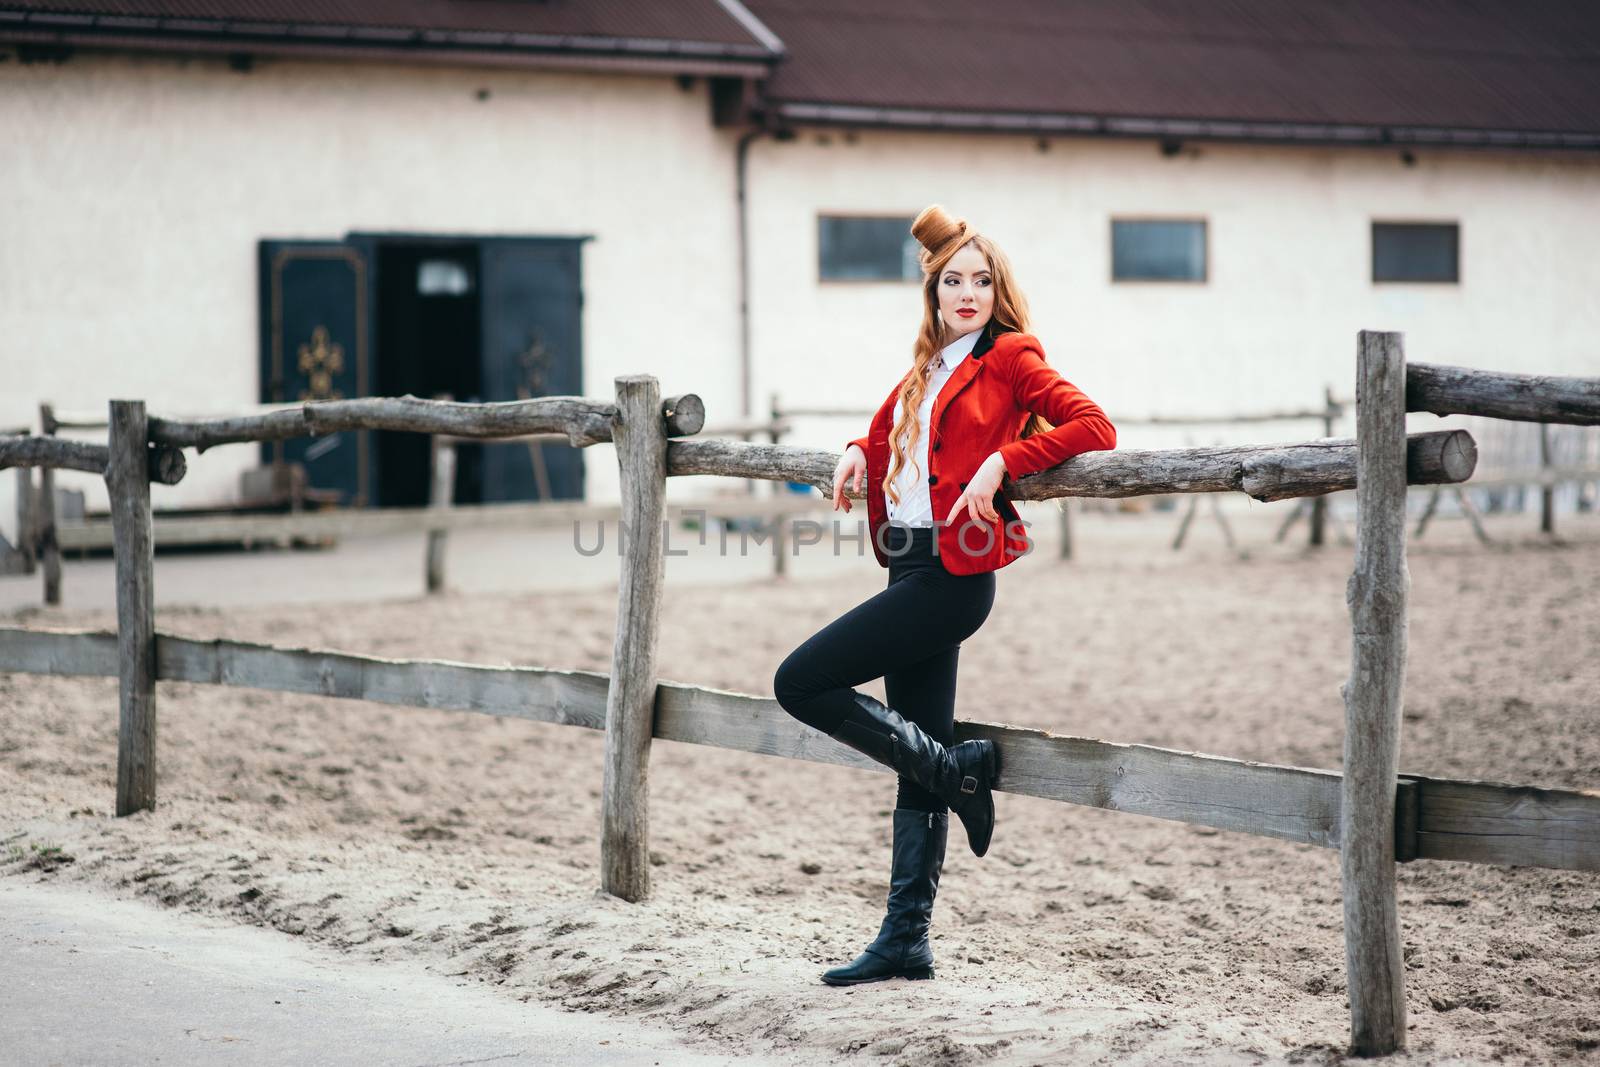 red-haired jockey girl in a red cardigan and black high boots stares at the fence